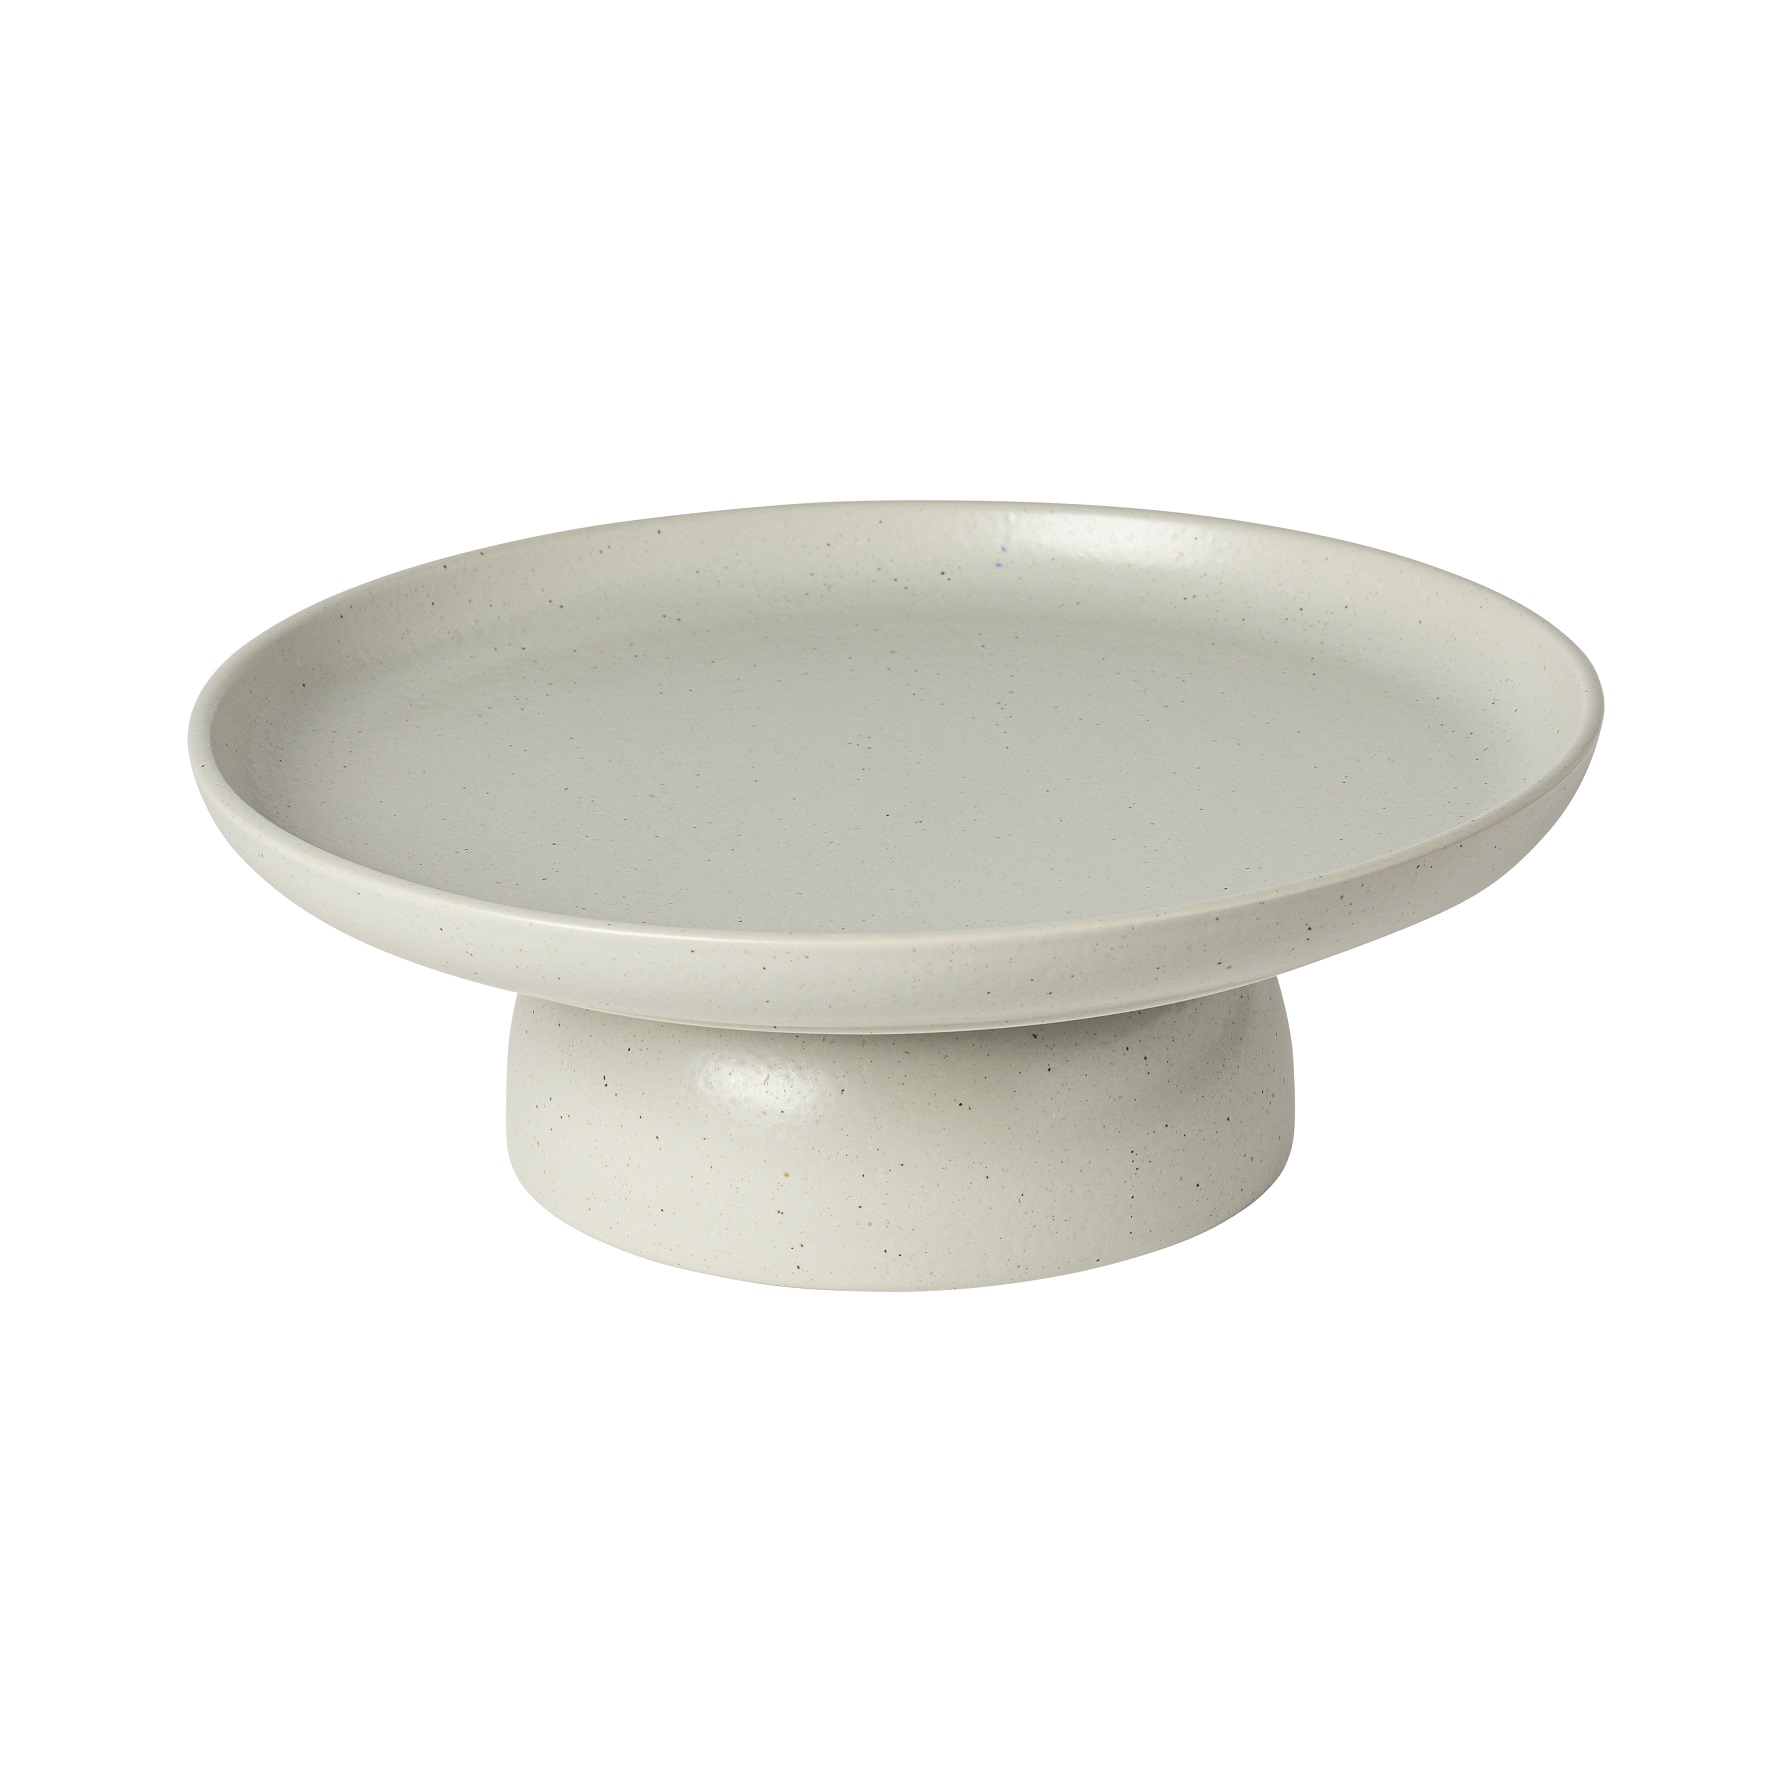 Pacifica Oyster Grey Footed Plate 27cm Gift